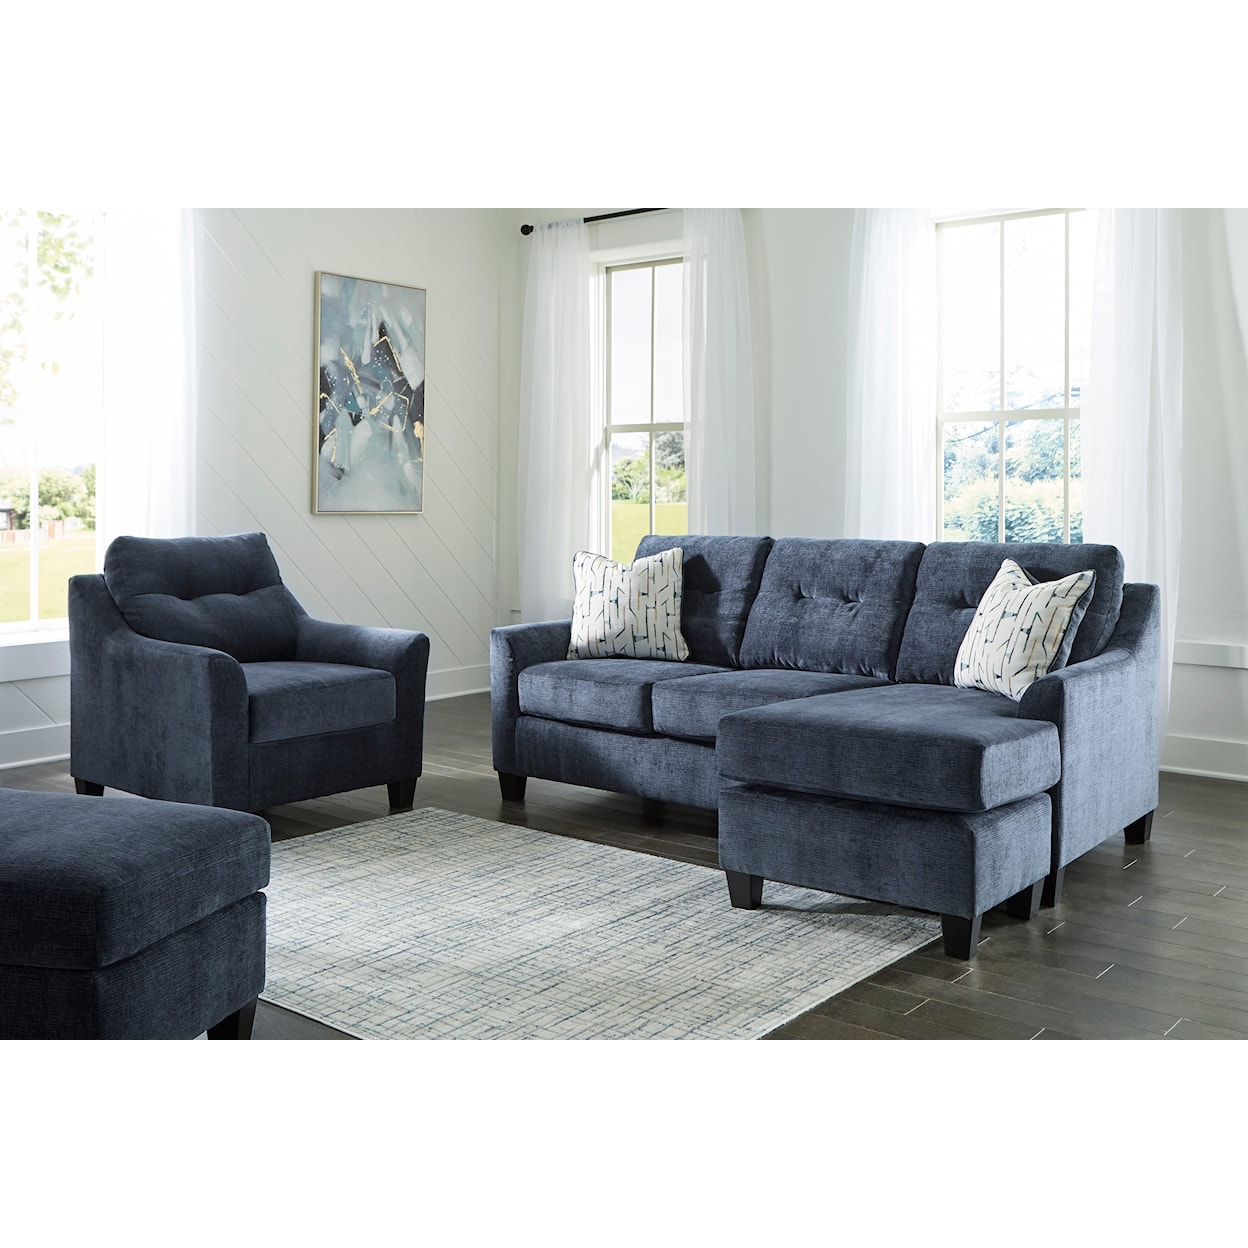 Benchcraft by Ashley Amity Bay Sofa Chaise, Chair, and Ottoman